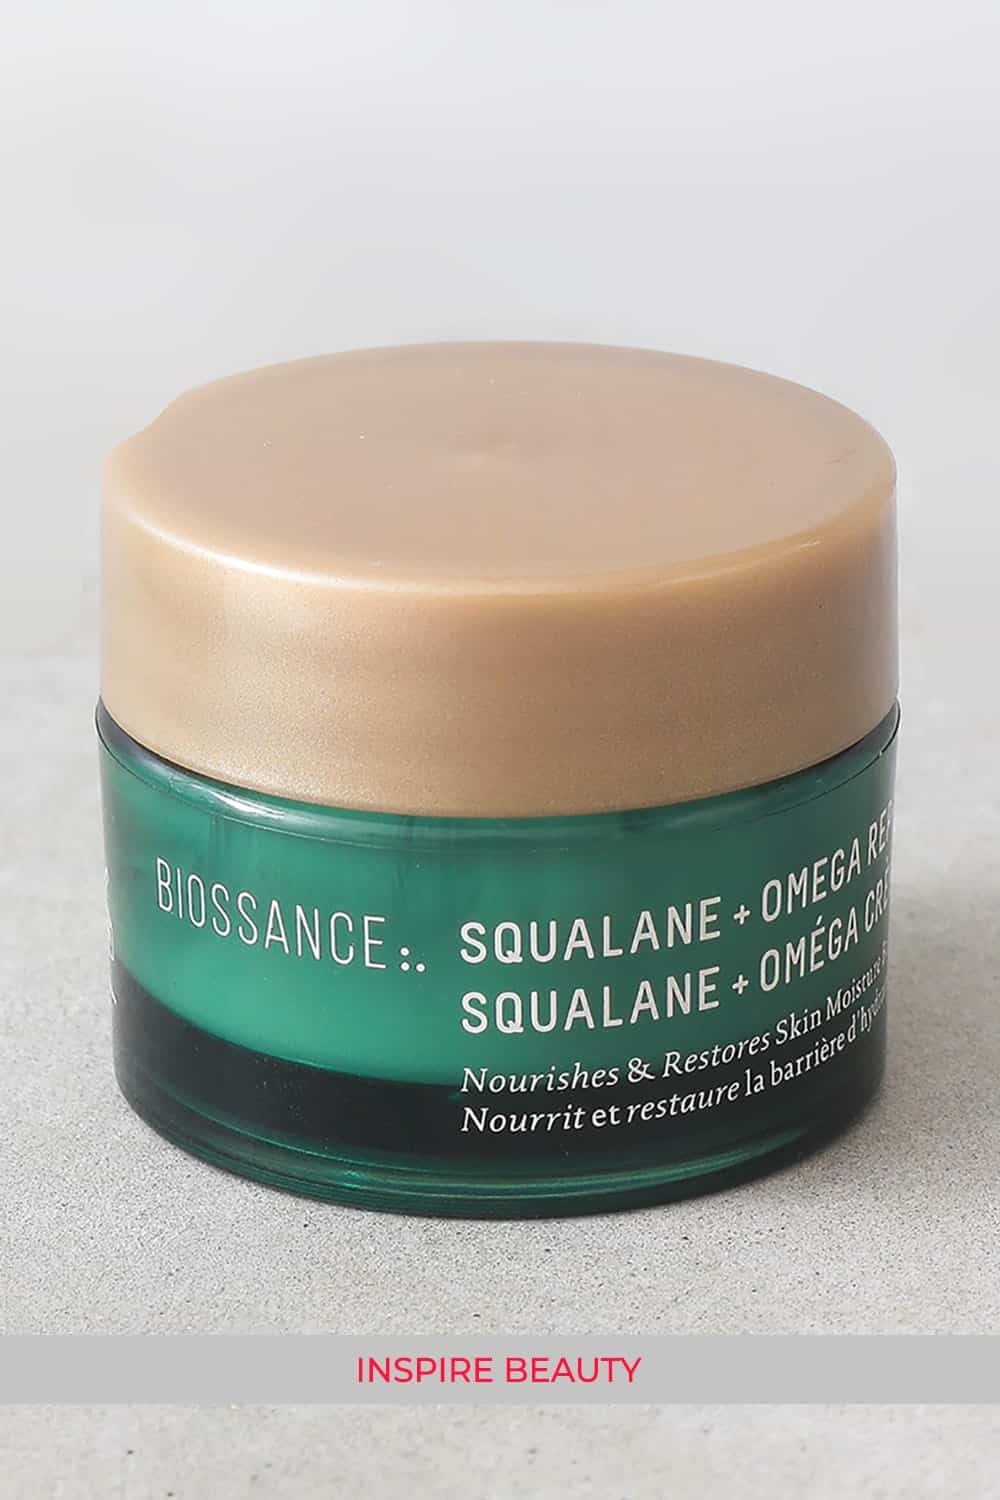 Biossance Squalane + Omega Repair Cream review for dry, dehydrated, irritated skin